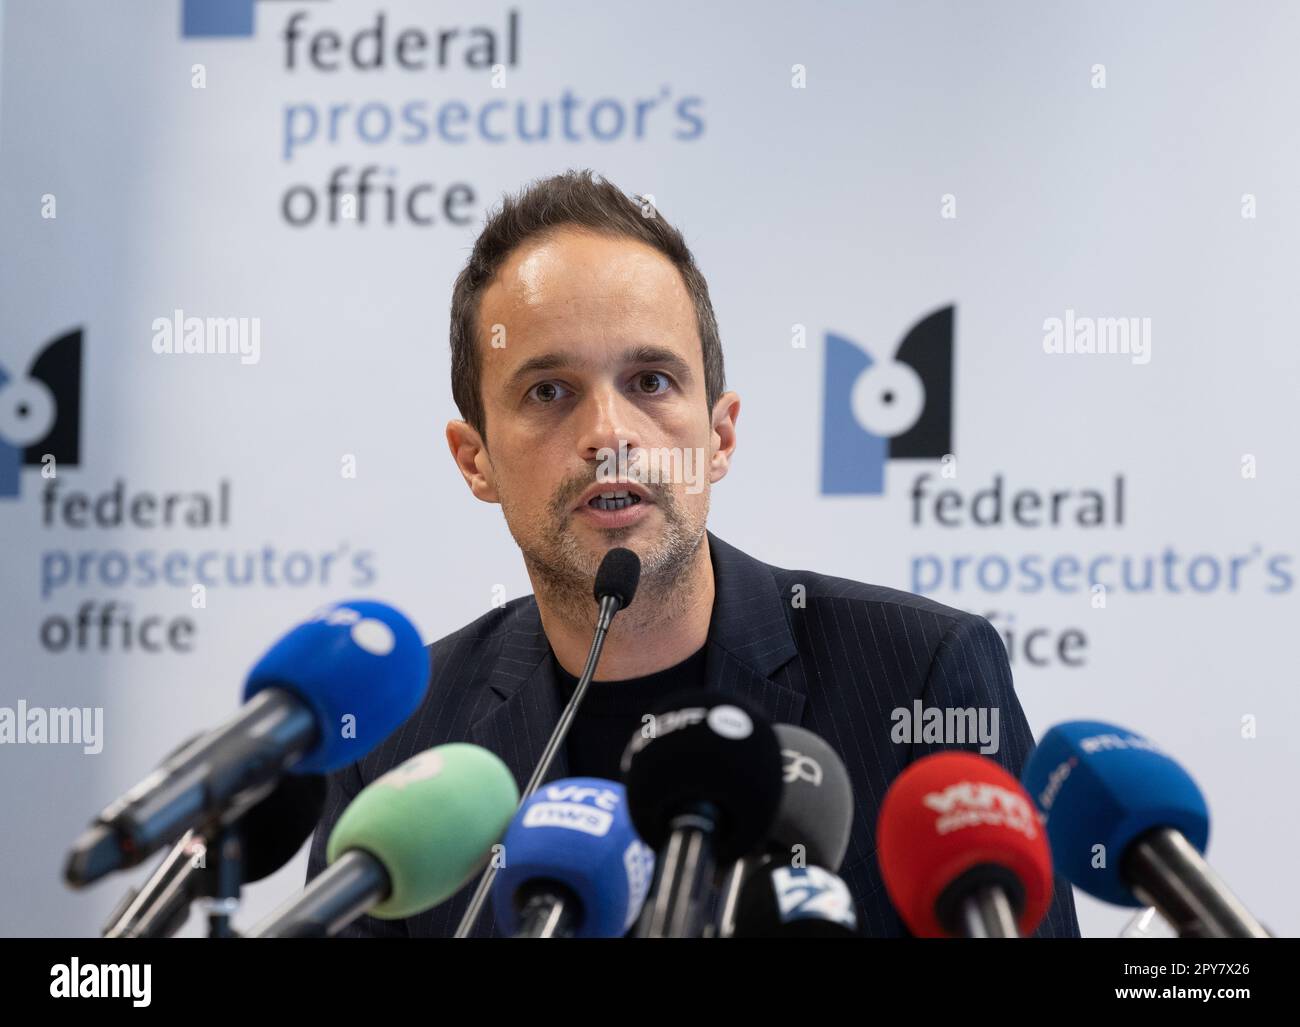 Federal magistrate Antoon Schotsaert pictured during a press conference, in Brussels, regarding a large-scale European operation which took place across several countries earlier this morning, Wednesday 03 May 2023. It concerns a file opened by the Belgian Federal Prosecutor's Office, in collaboration with the Limburg Prosecutor's Office, the Federal Judicial Police, Eurojust, Europol and various countries, in particular Italy. This operation targeted more than a hundred suspected members of the Calabrian mafia. More than 20 searches were carried out in Belgium. BELGA PHOTO BENOIT DOPPAGNE Stock Photo